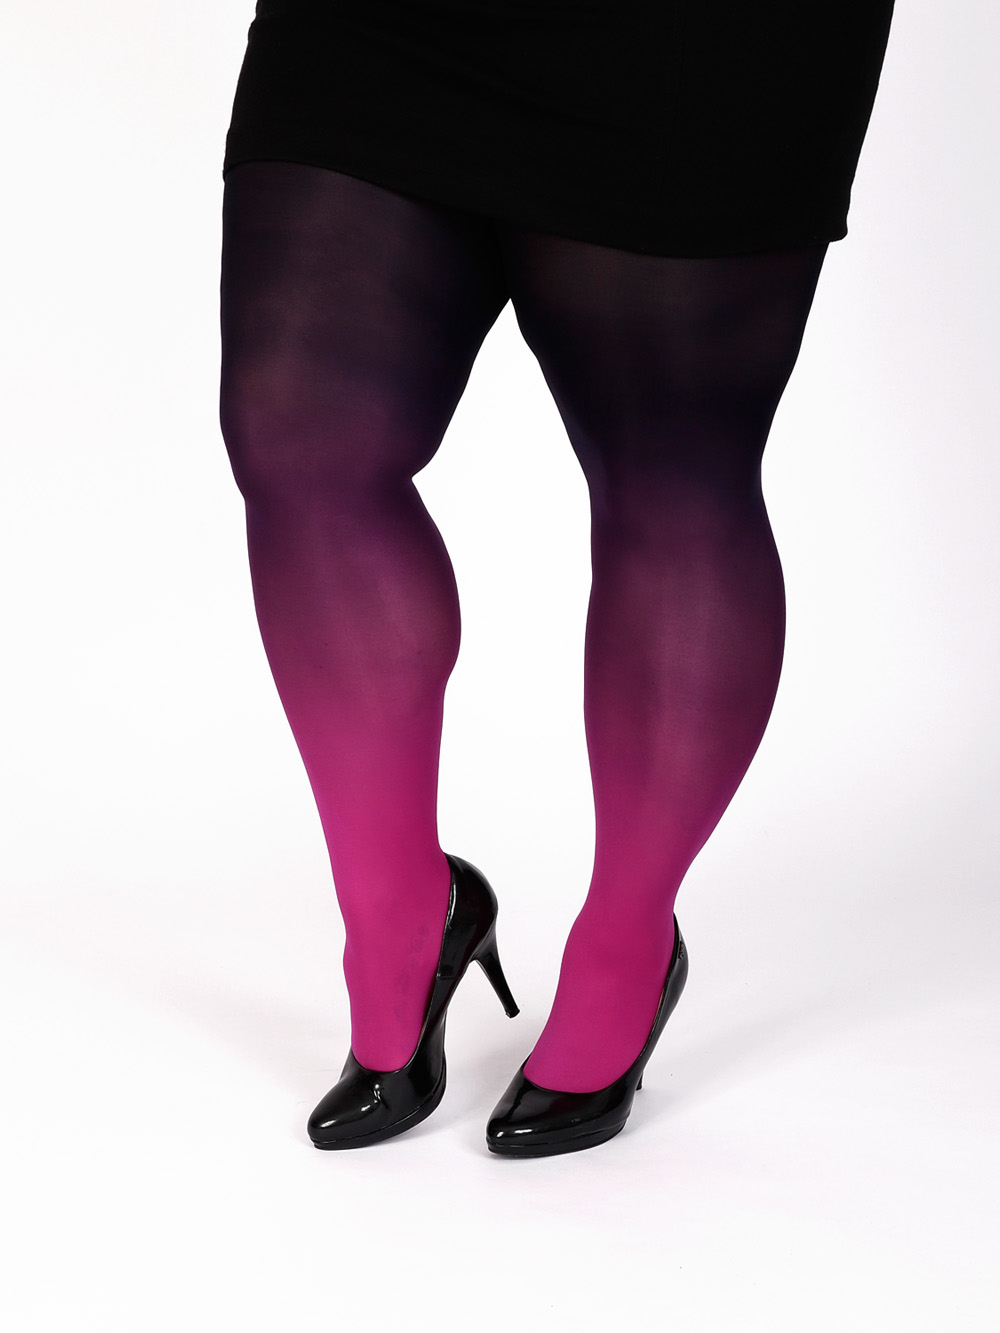 Plus size hot pink-black tights - Virivee Tights - Unique tights designed  and made in Europe